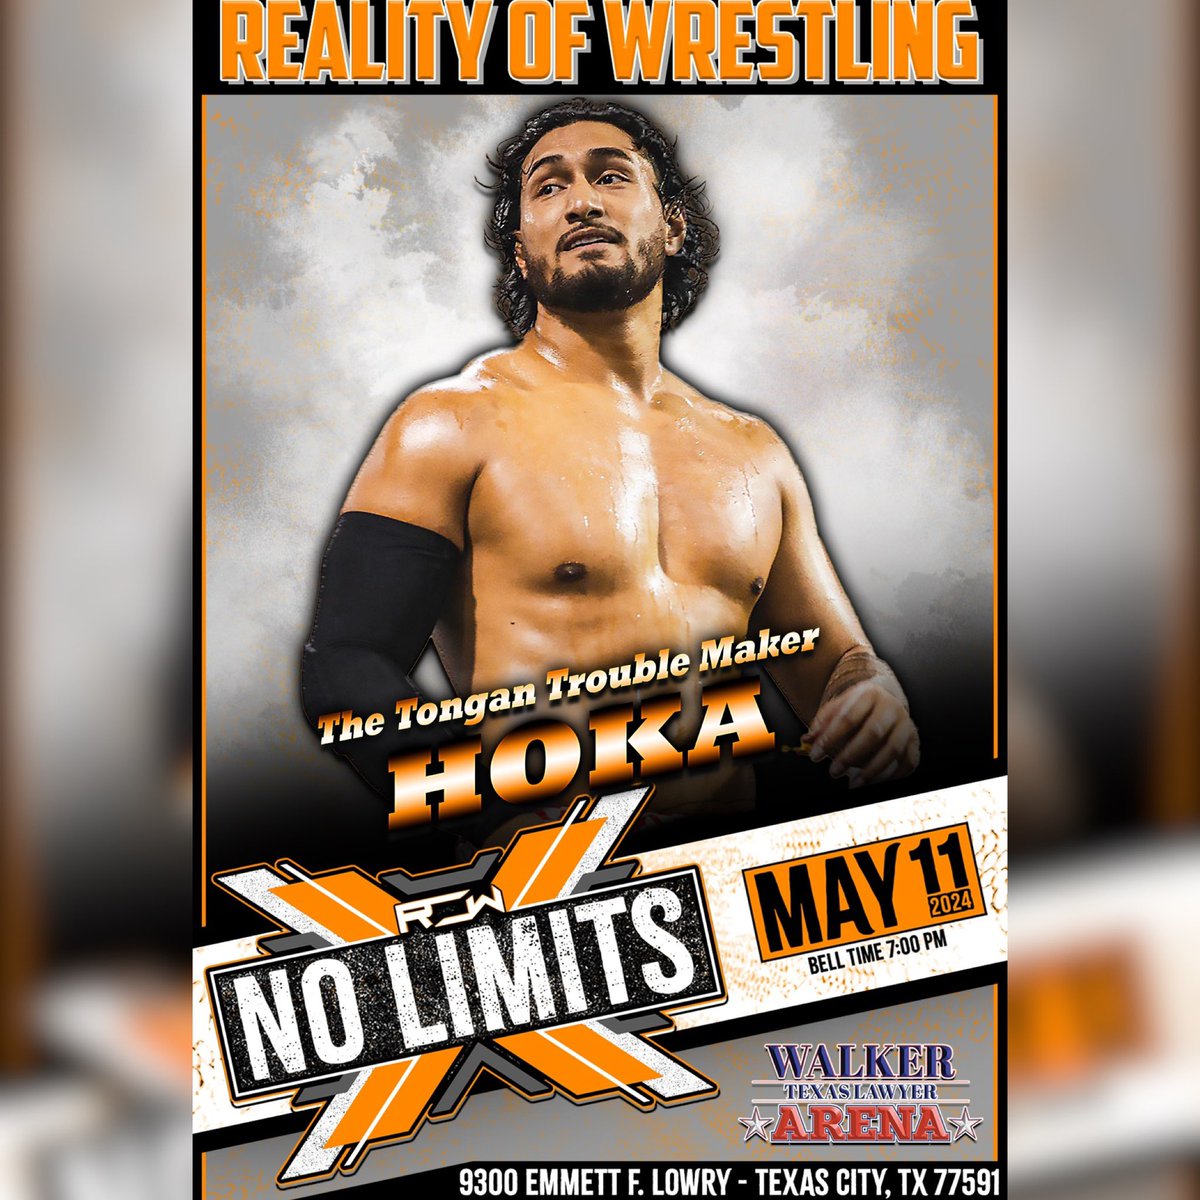 ‼️ TALENT ANNOUNCEMENT ‼️ The Tongan Troublemaker @Alema_Collins1 aka #Hoka makes his Reality Of Wrestling singles debut at #NoLimits on Saturday, May 11th in Texas City, Tx at the Walker Texas Lawyer Arena! LOCATION: 9300 Emmett F Lowry Expressway Texas City, TX 77591 PICK…